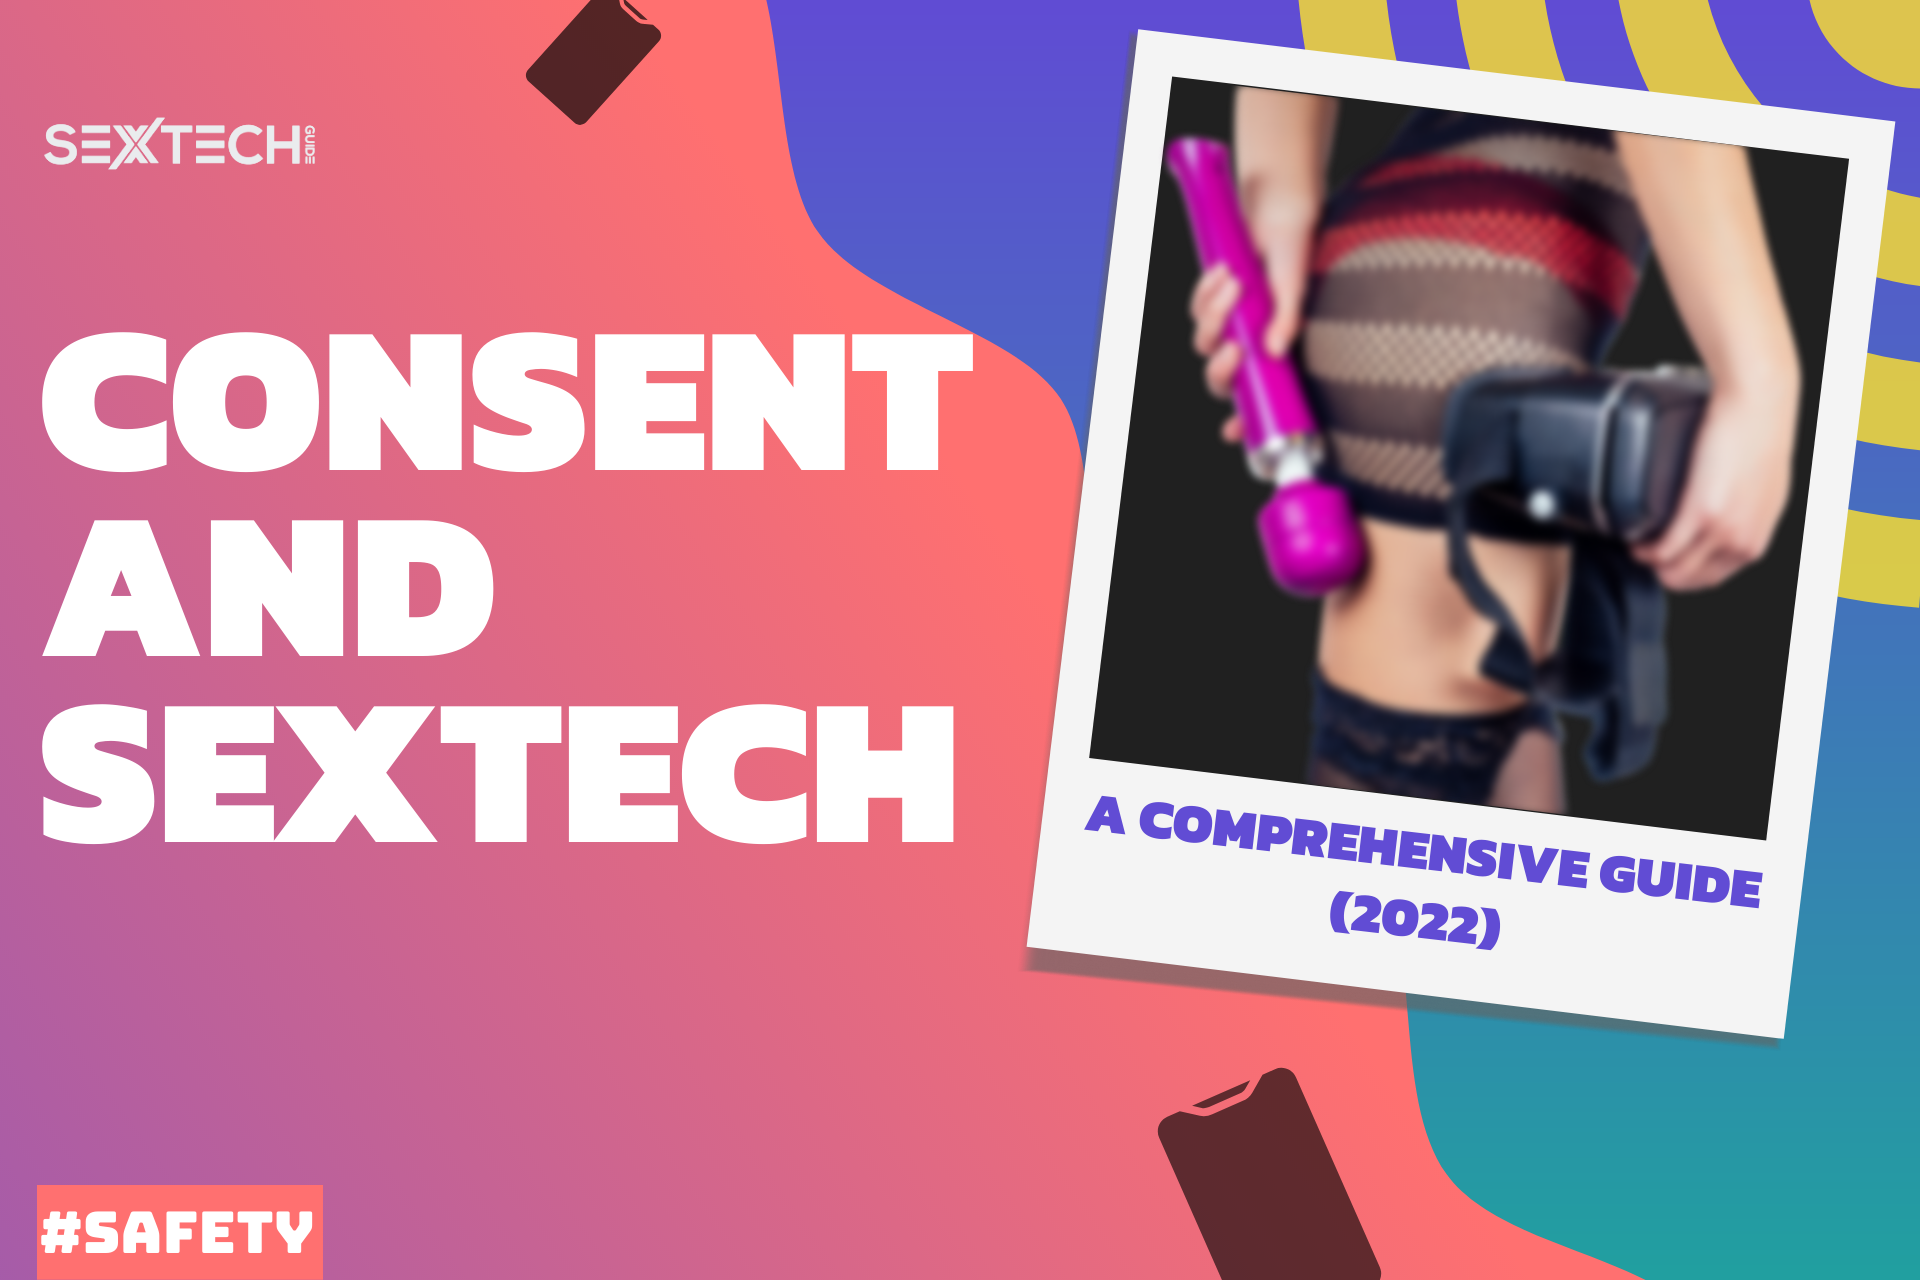 Consent 101: The ultimate guide to helping you understand sextech and consent